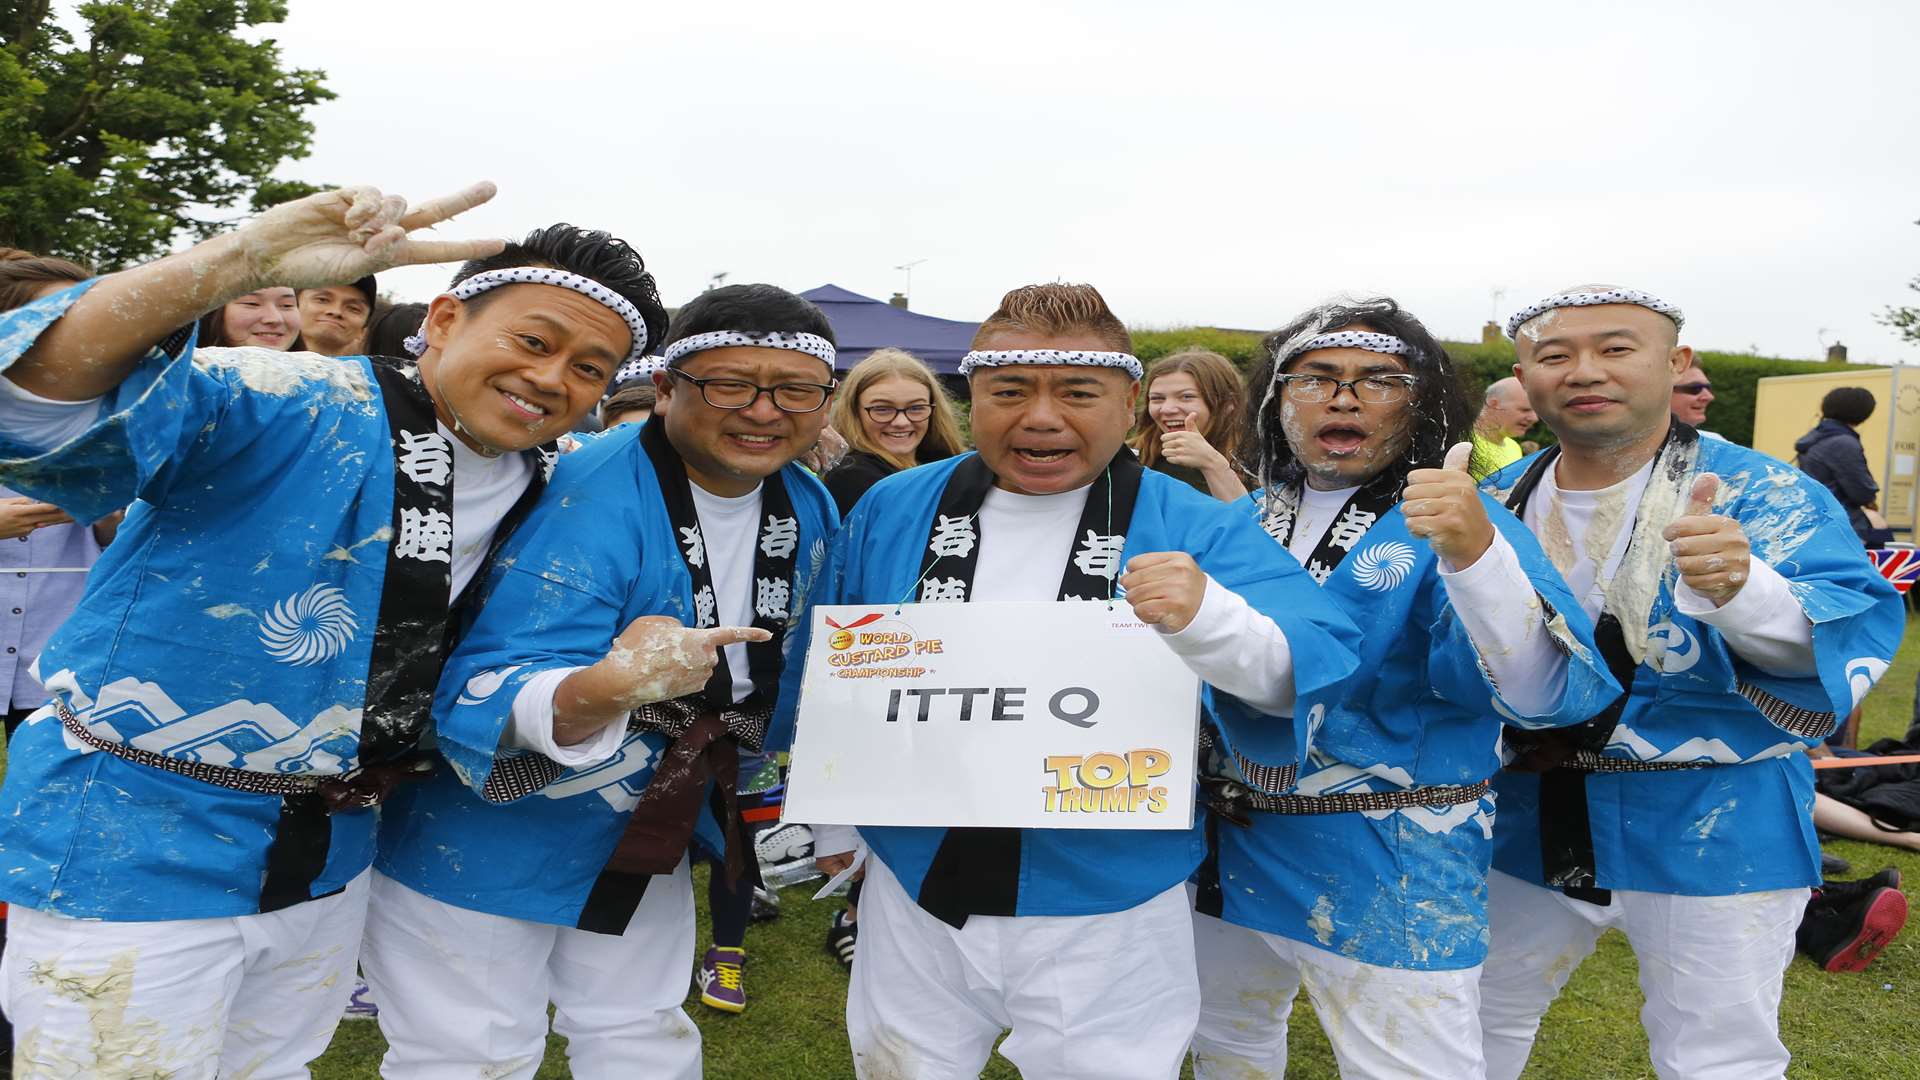 Last year's world champions Itte Q of Japan travelled to compete in the championships. Picture: Andy Jones